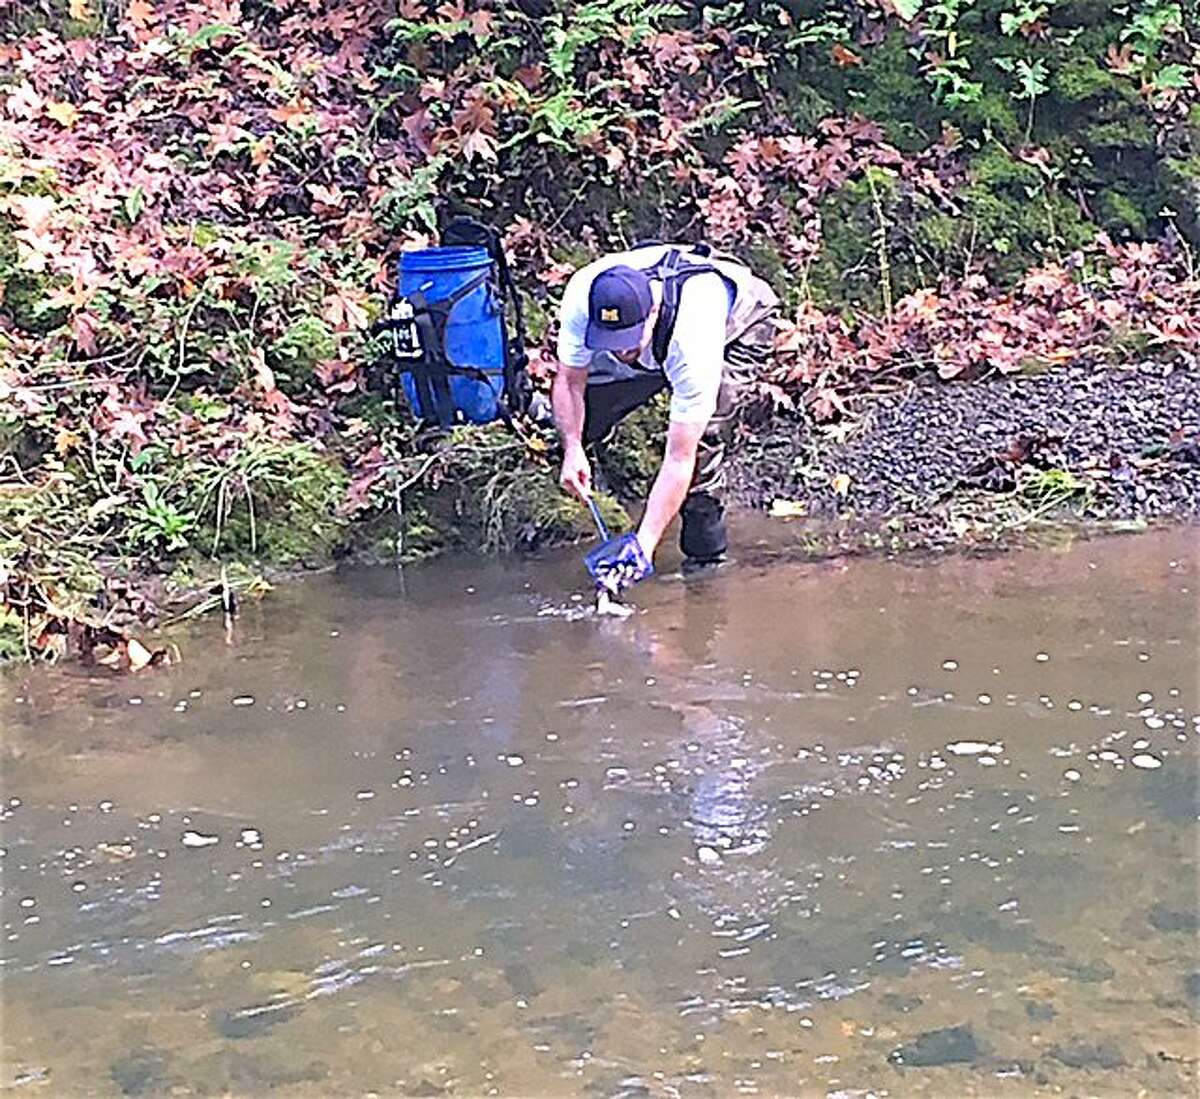 A volunteers releases coho salmon smolt into Porter Creek, a tributary to the Russian River in Sonoma County, to help jump-start the river's coho restoration.